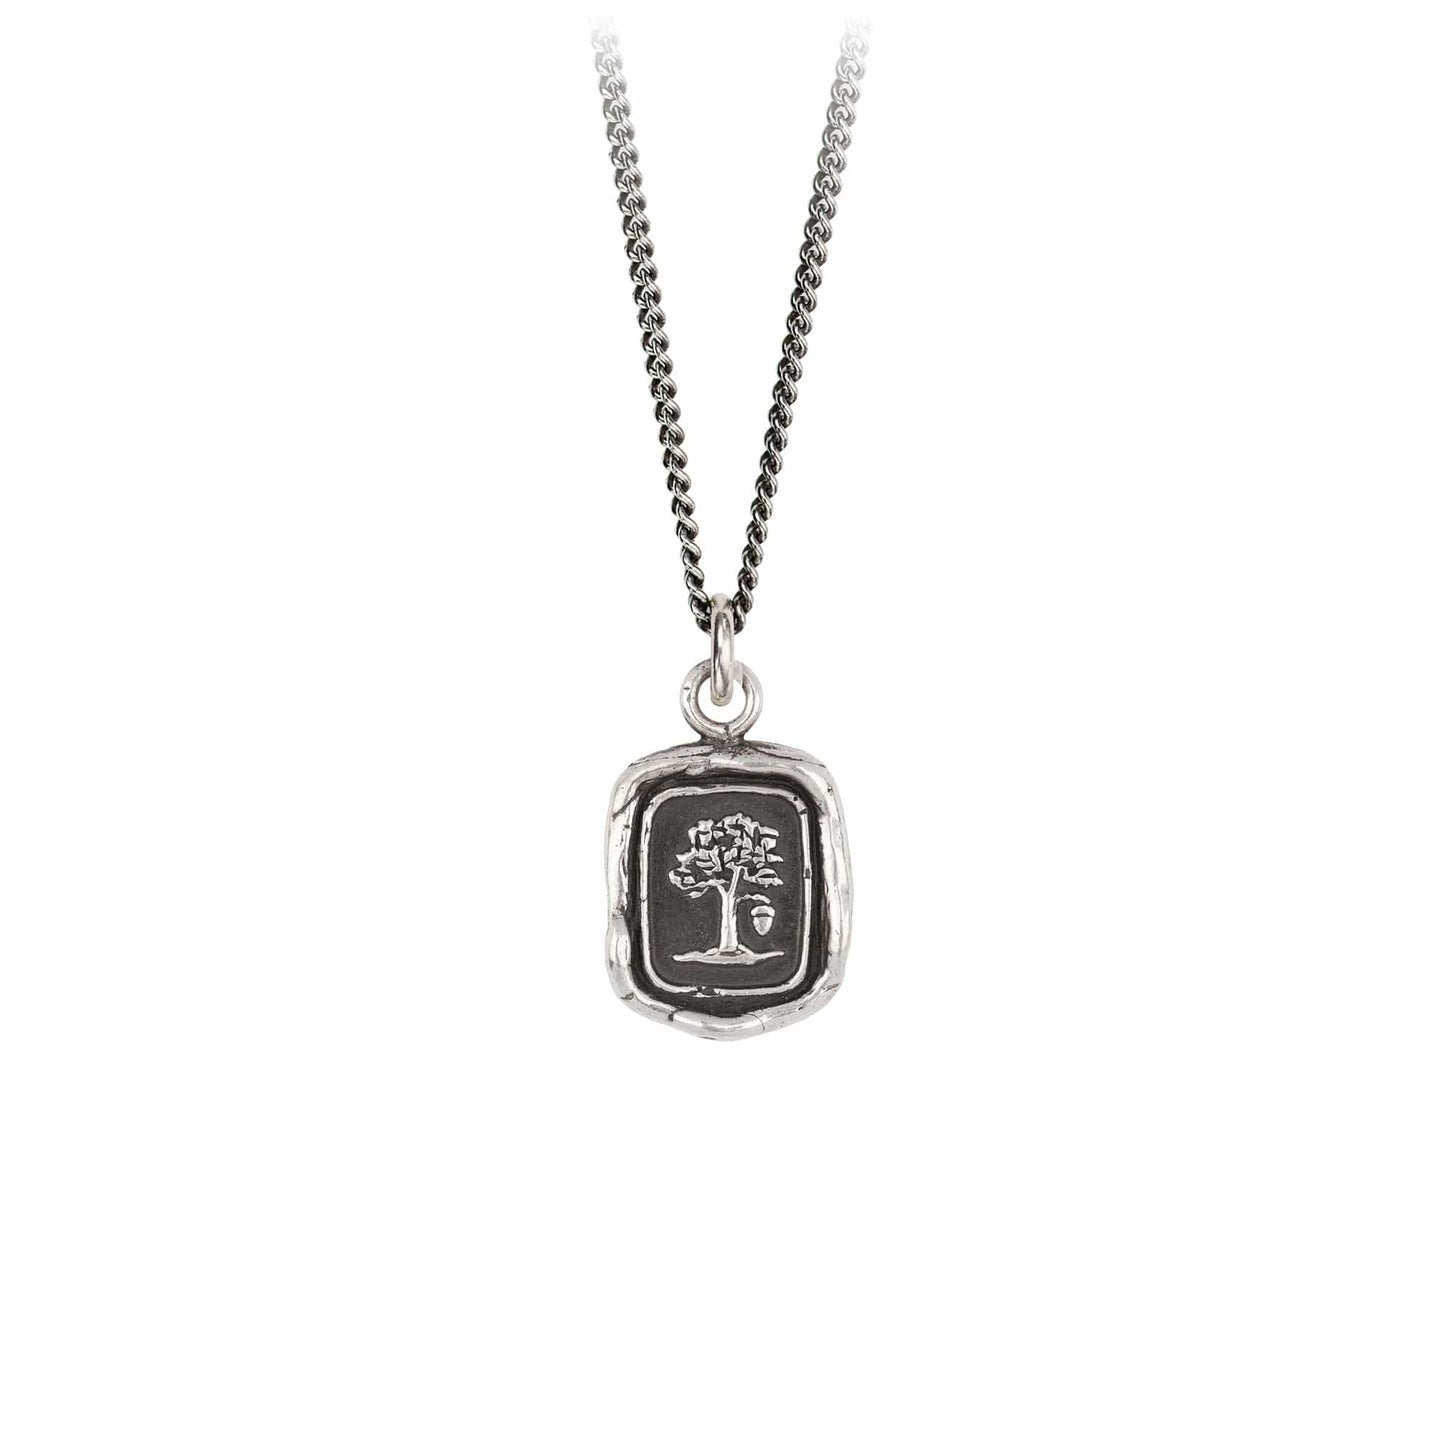 NKL Potential for Greatness Talisman Necklace